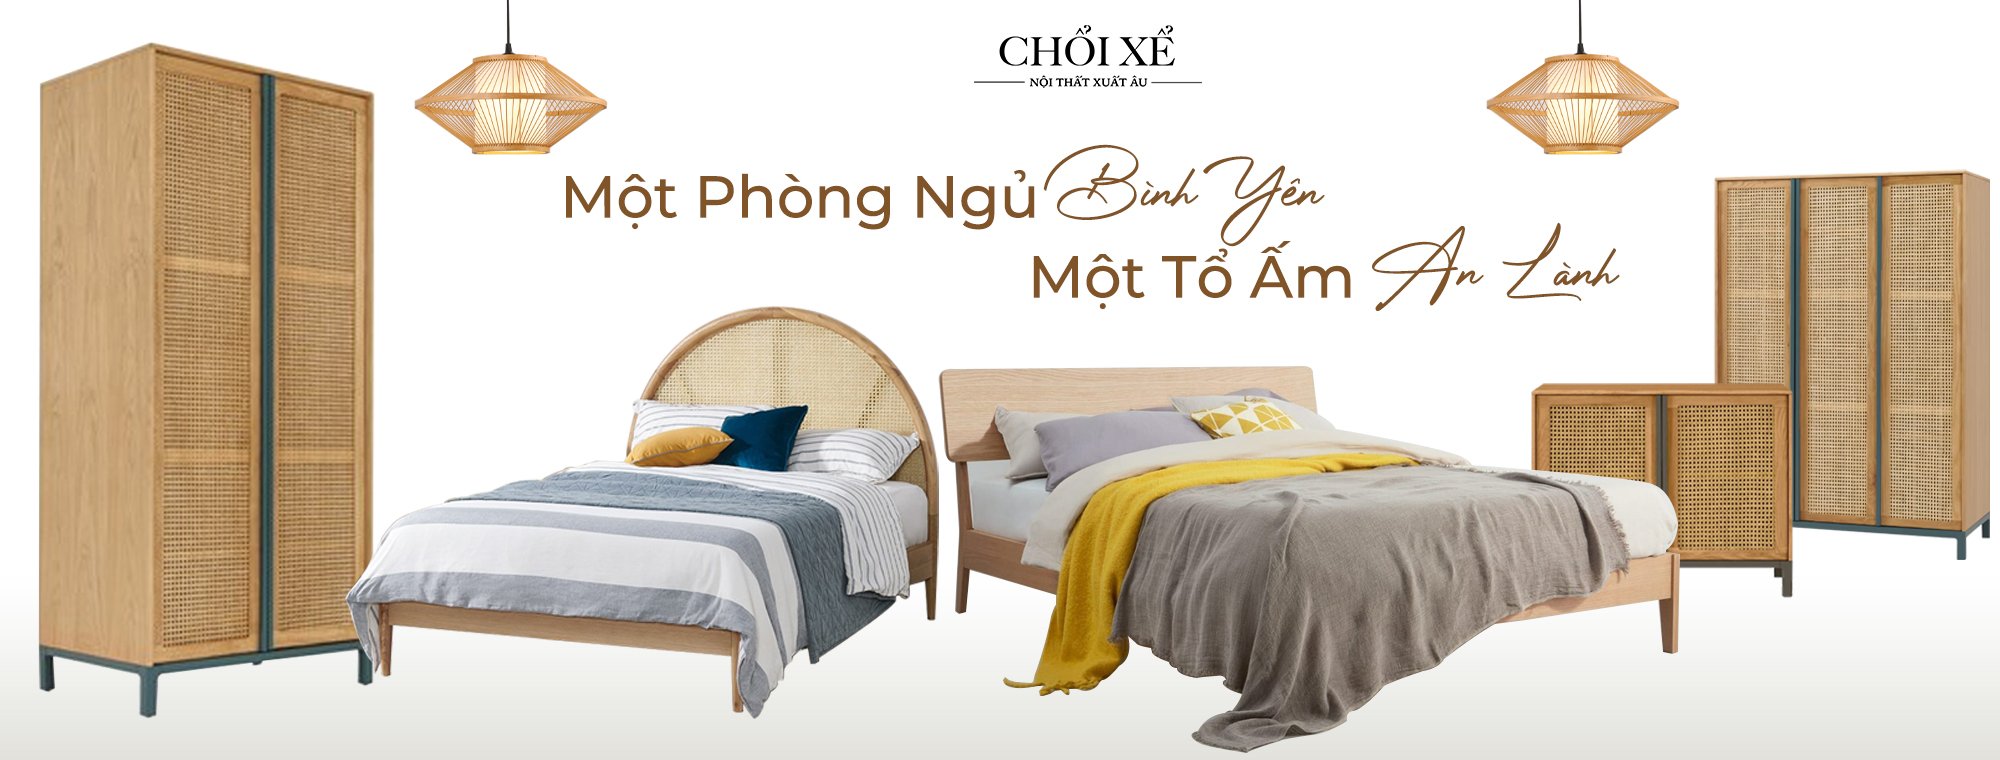 https://choixe.vn/search?q=napa&type=product